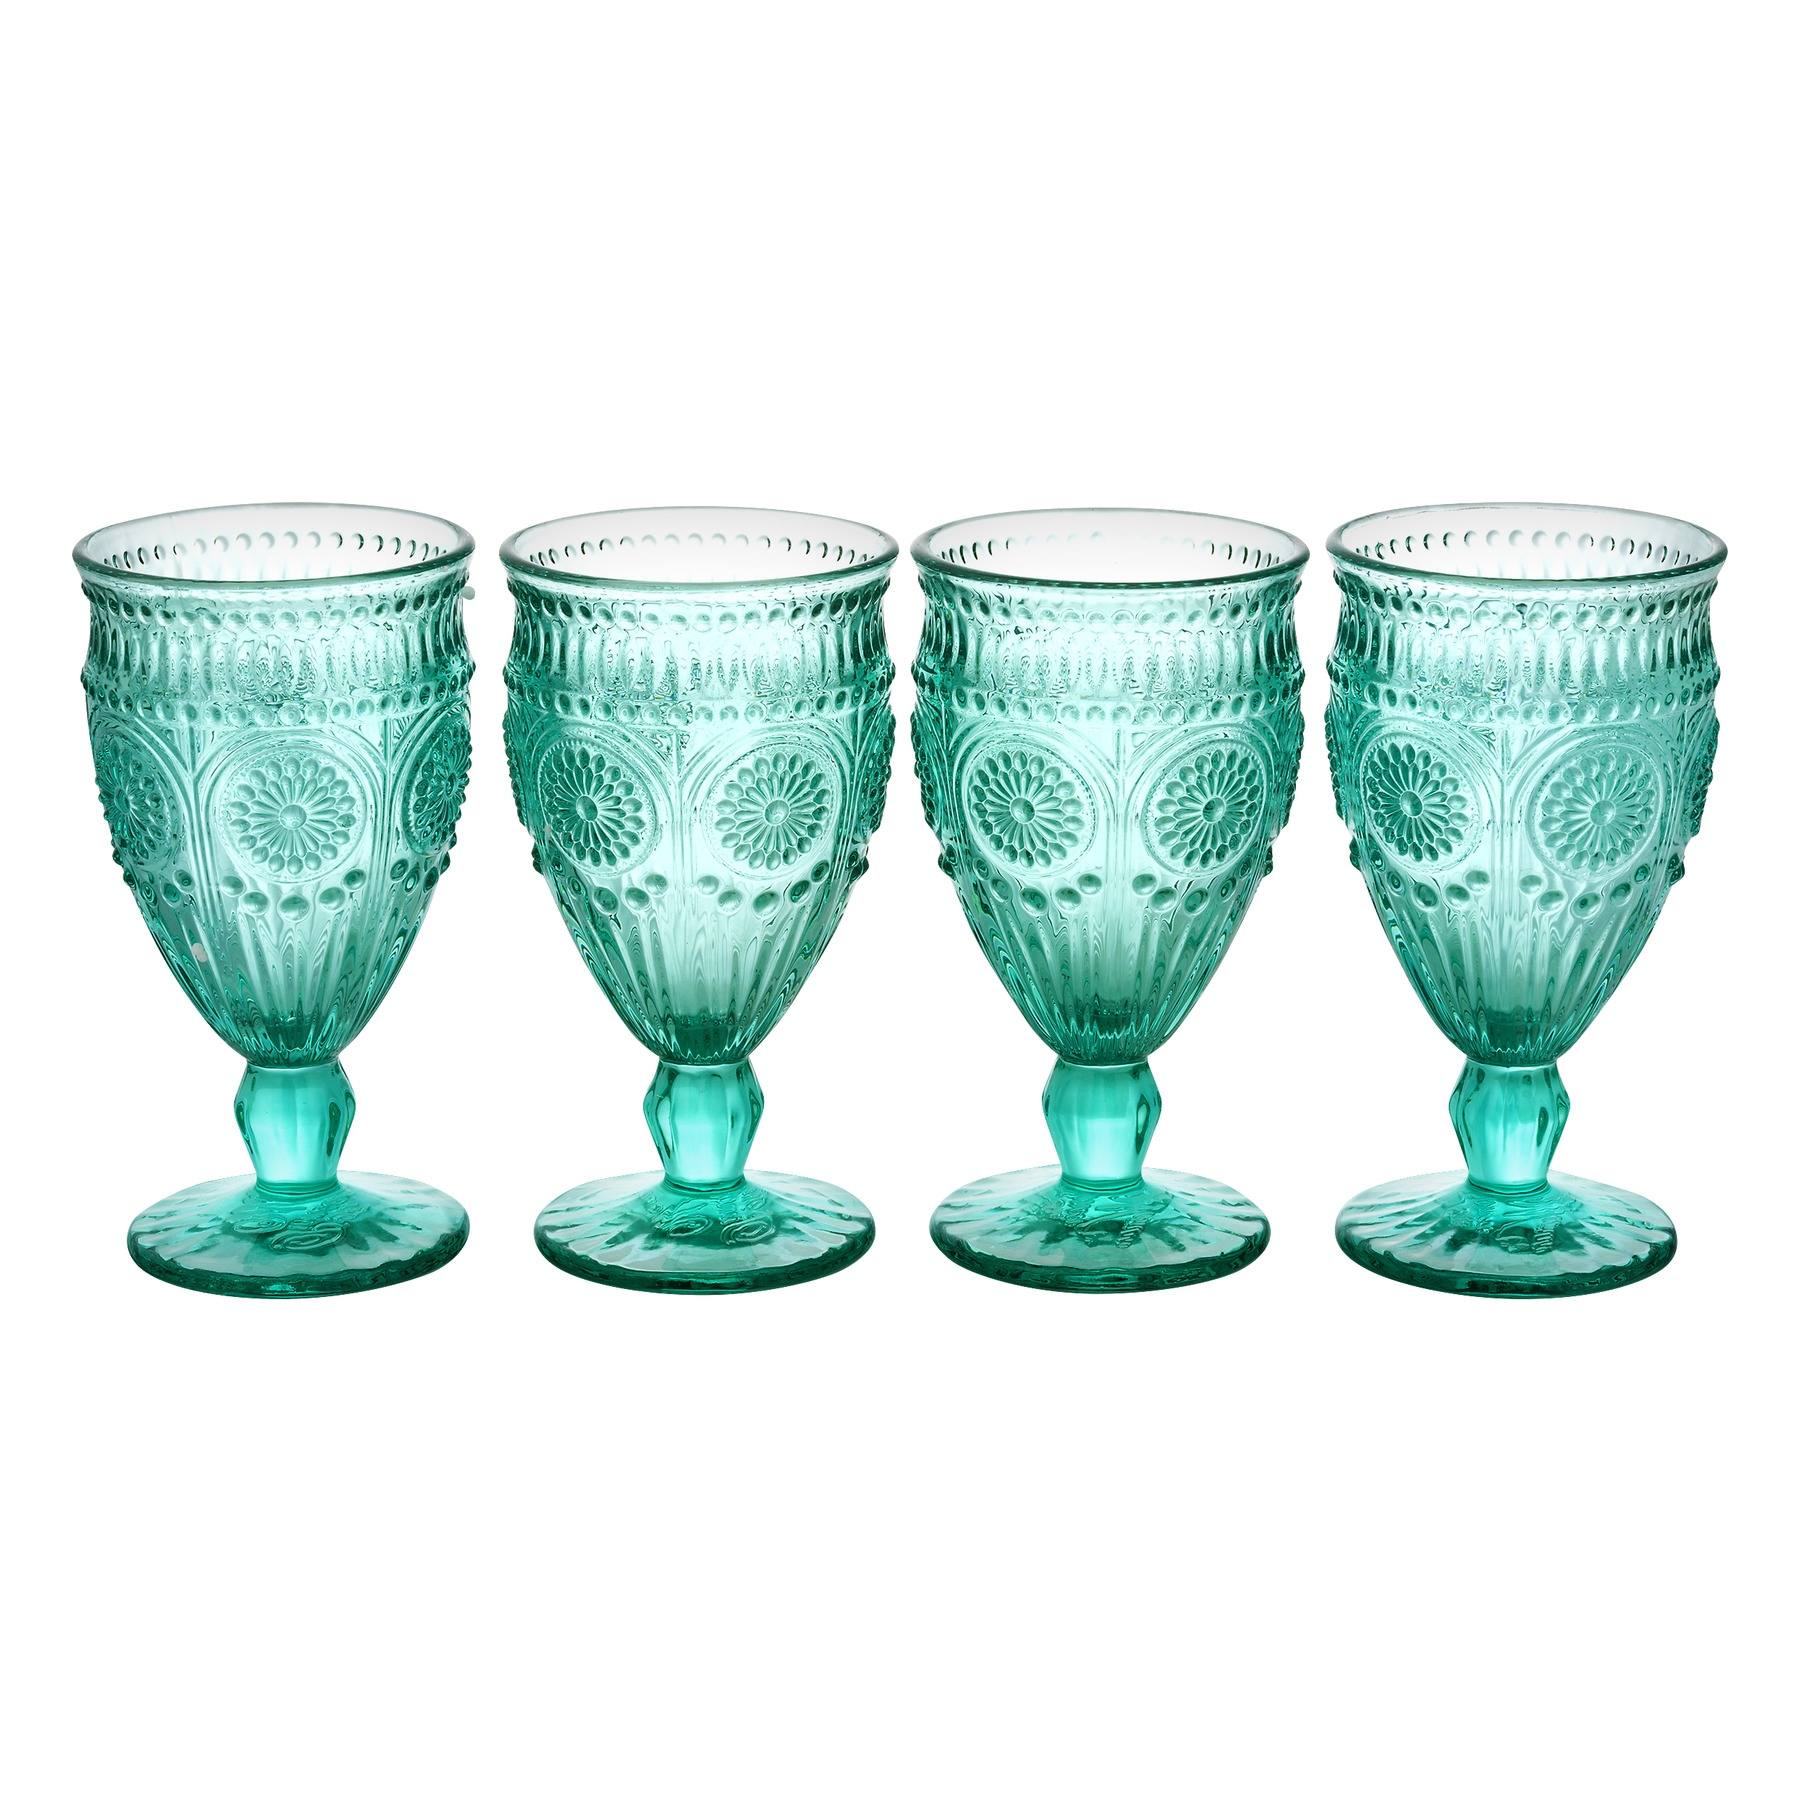 The Pioneer Woman Adeline 12-Ounce Footed Turquoise Glass Goblets, Set of 4 - image 1 of 5